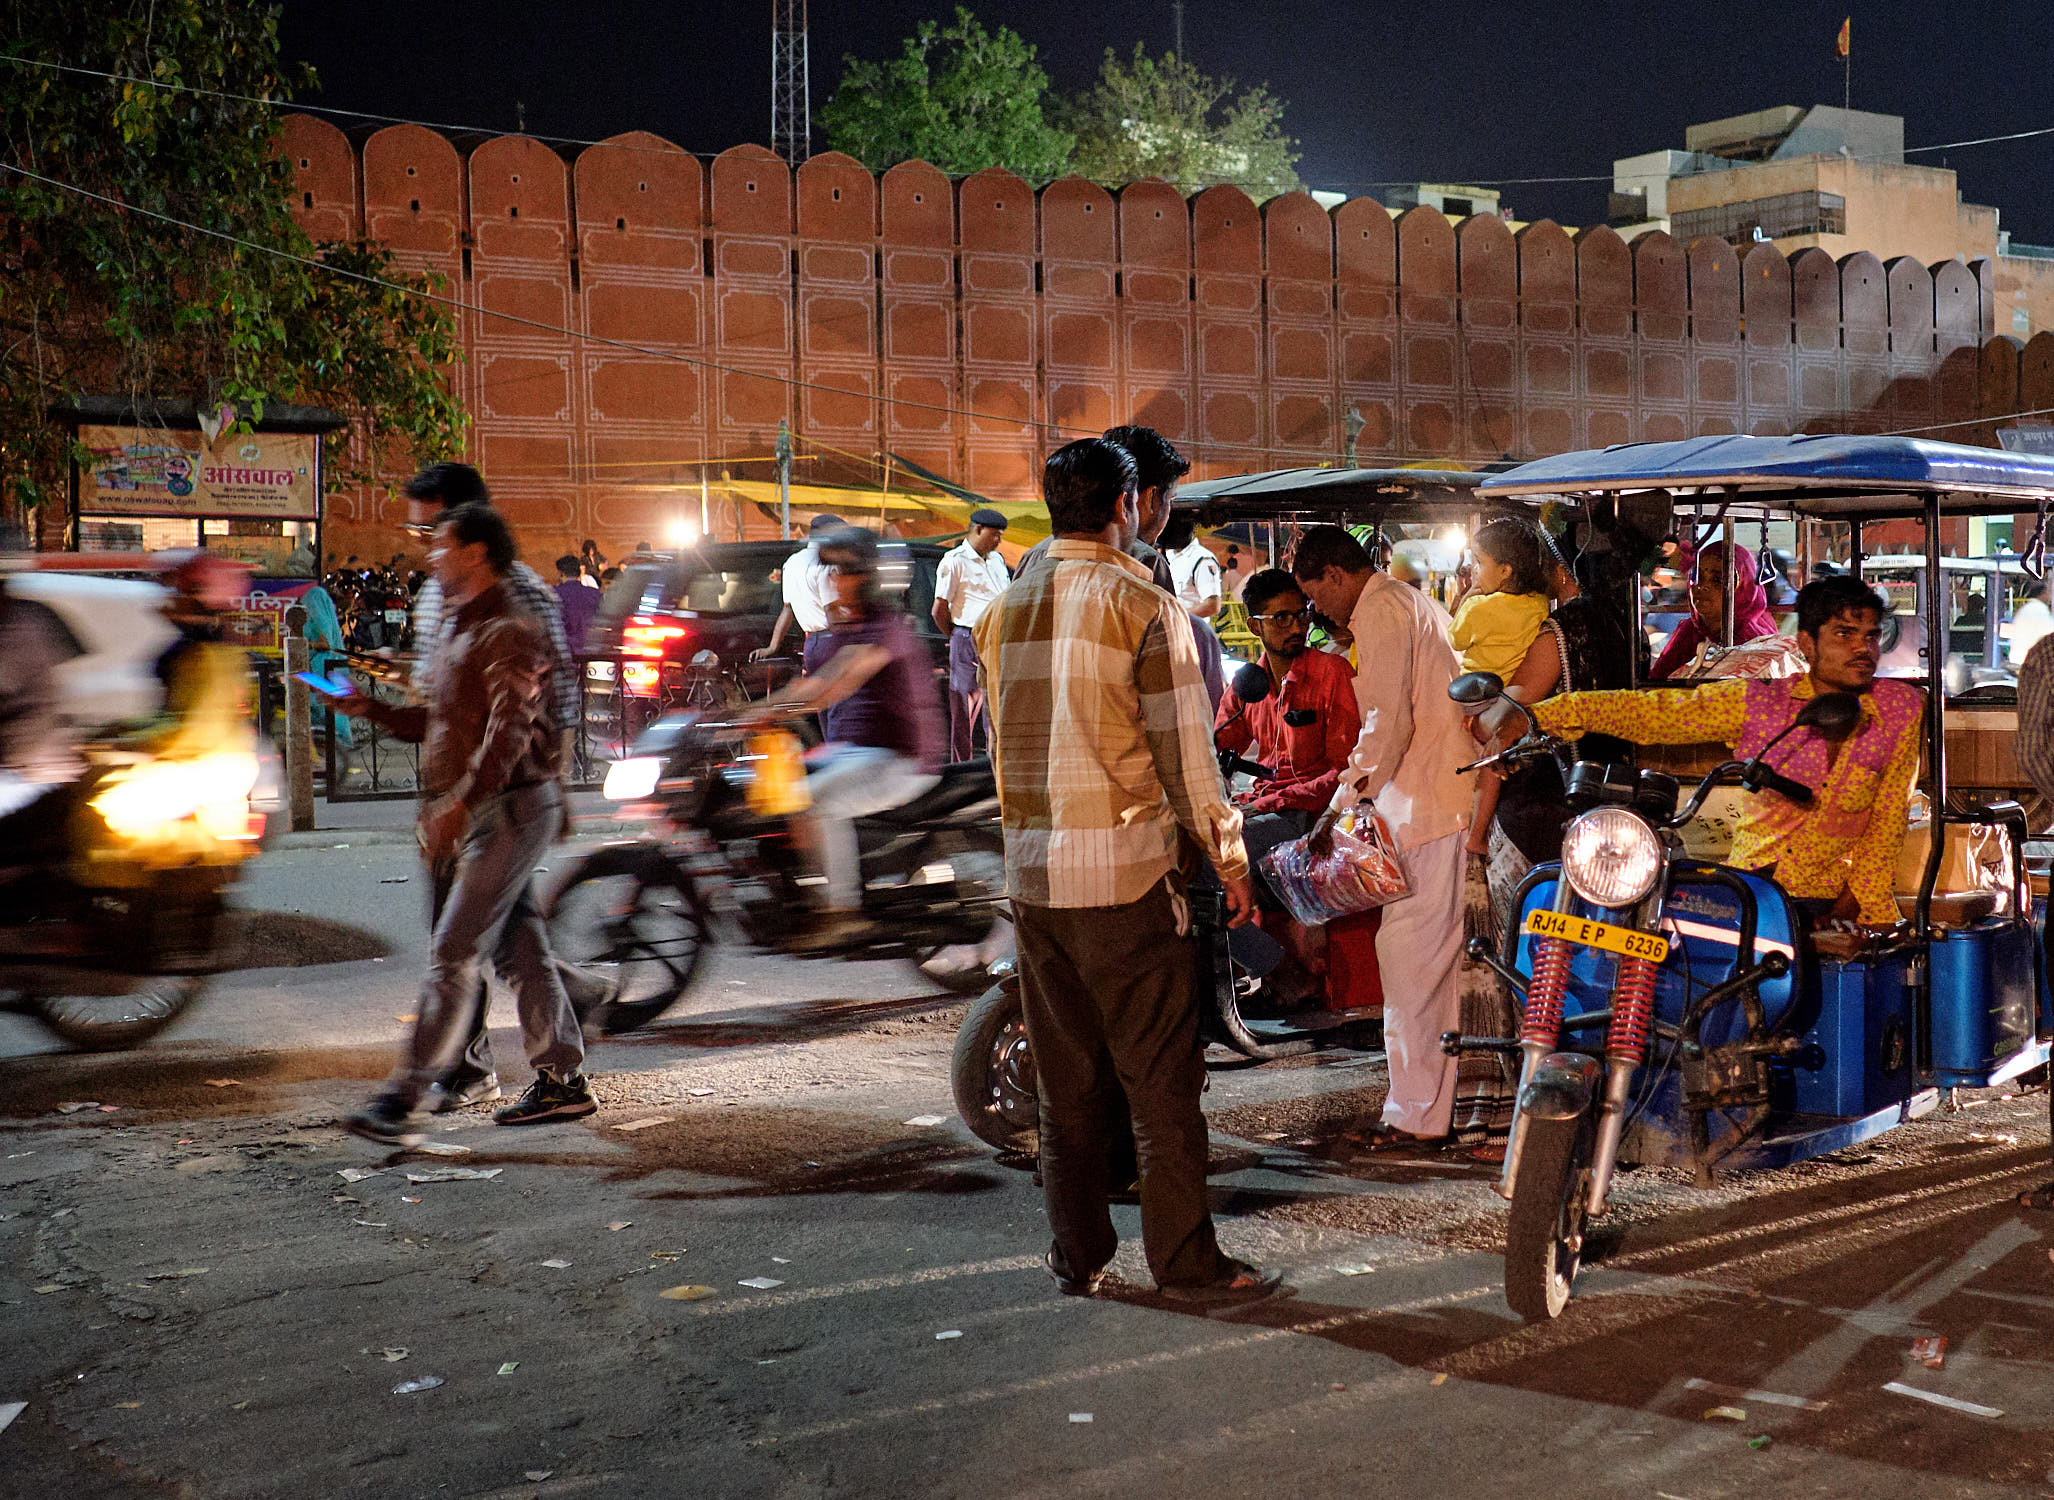 Chaotic streets of Jaipur